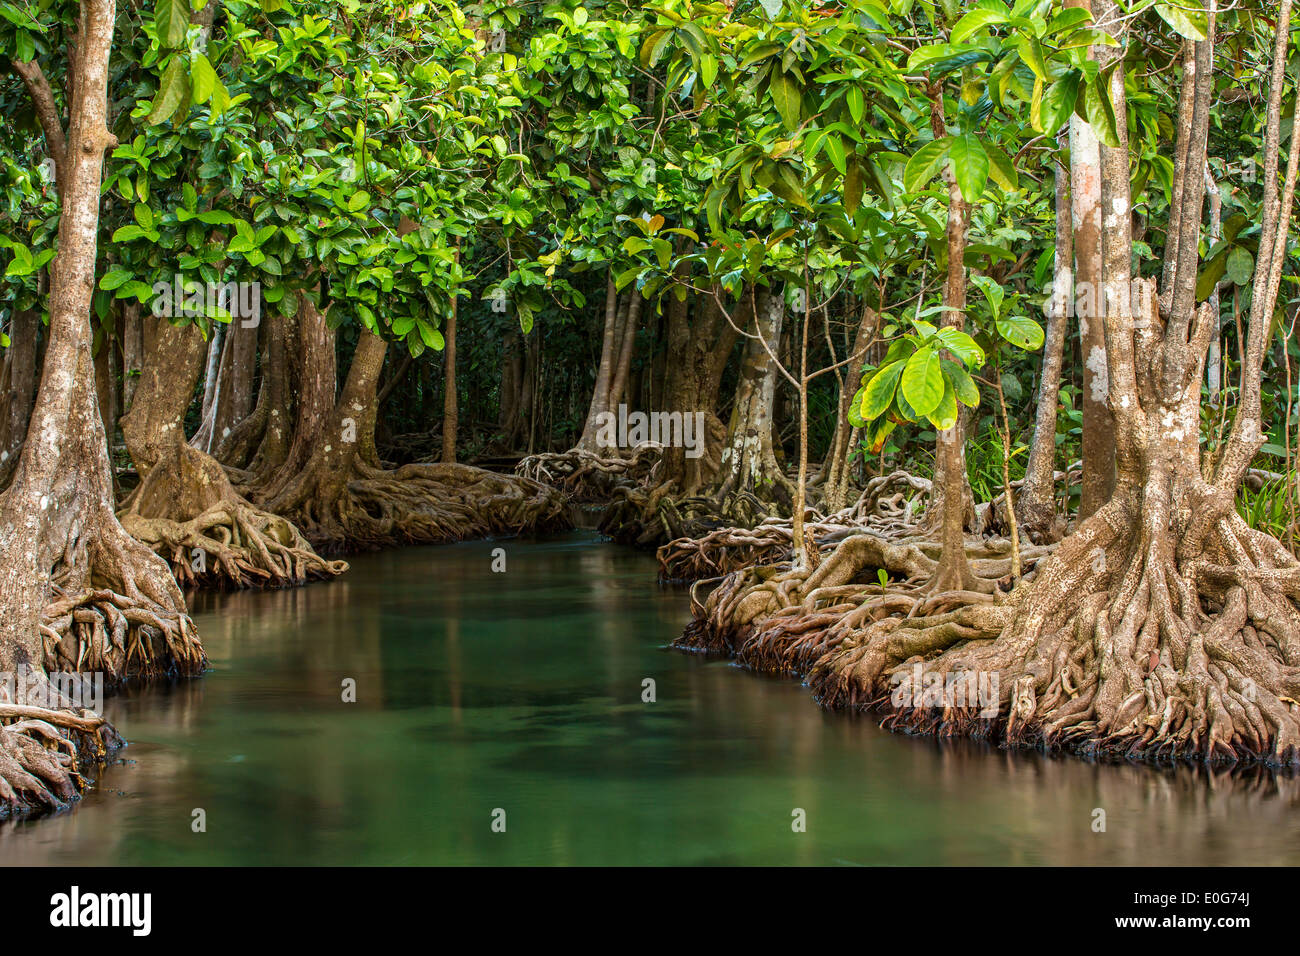 Mangrove trees along the turquoise green water in the stream Stock Photo